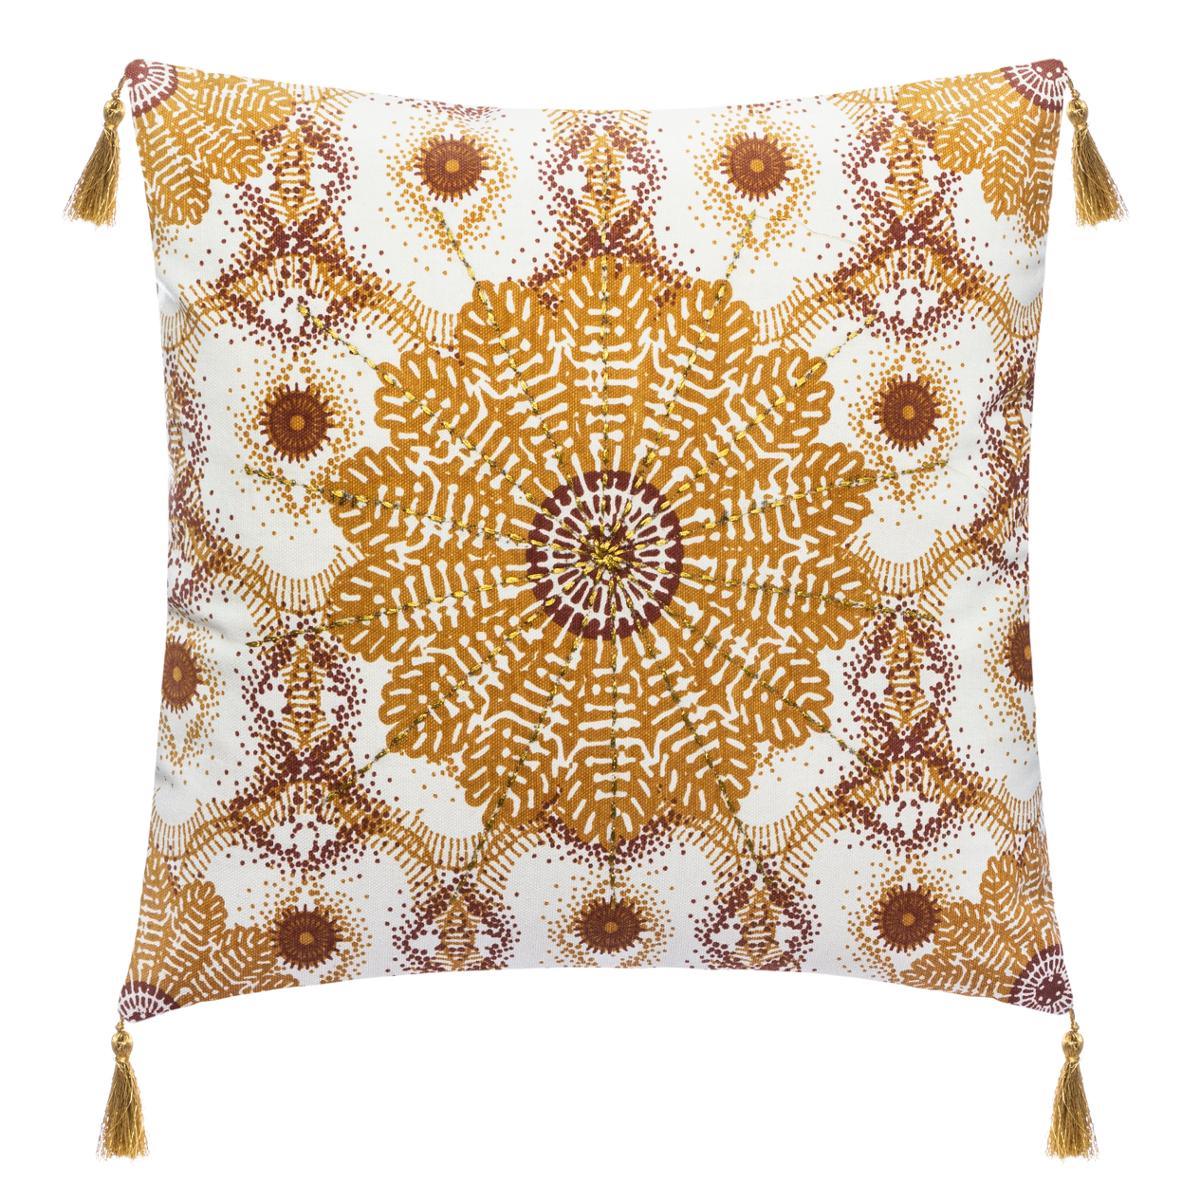 HOUSSE COUSSIN ROSACE BRODEE 40X40CM